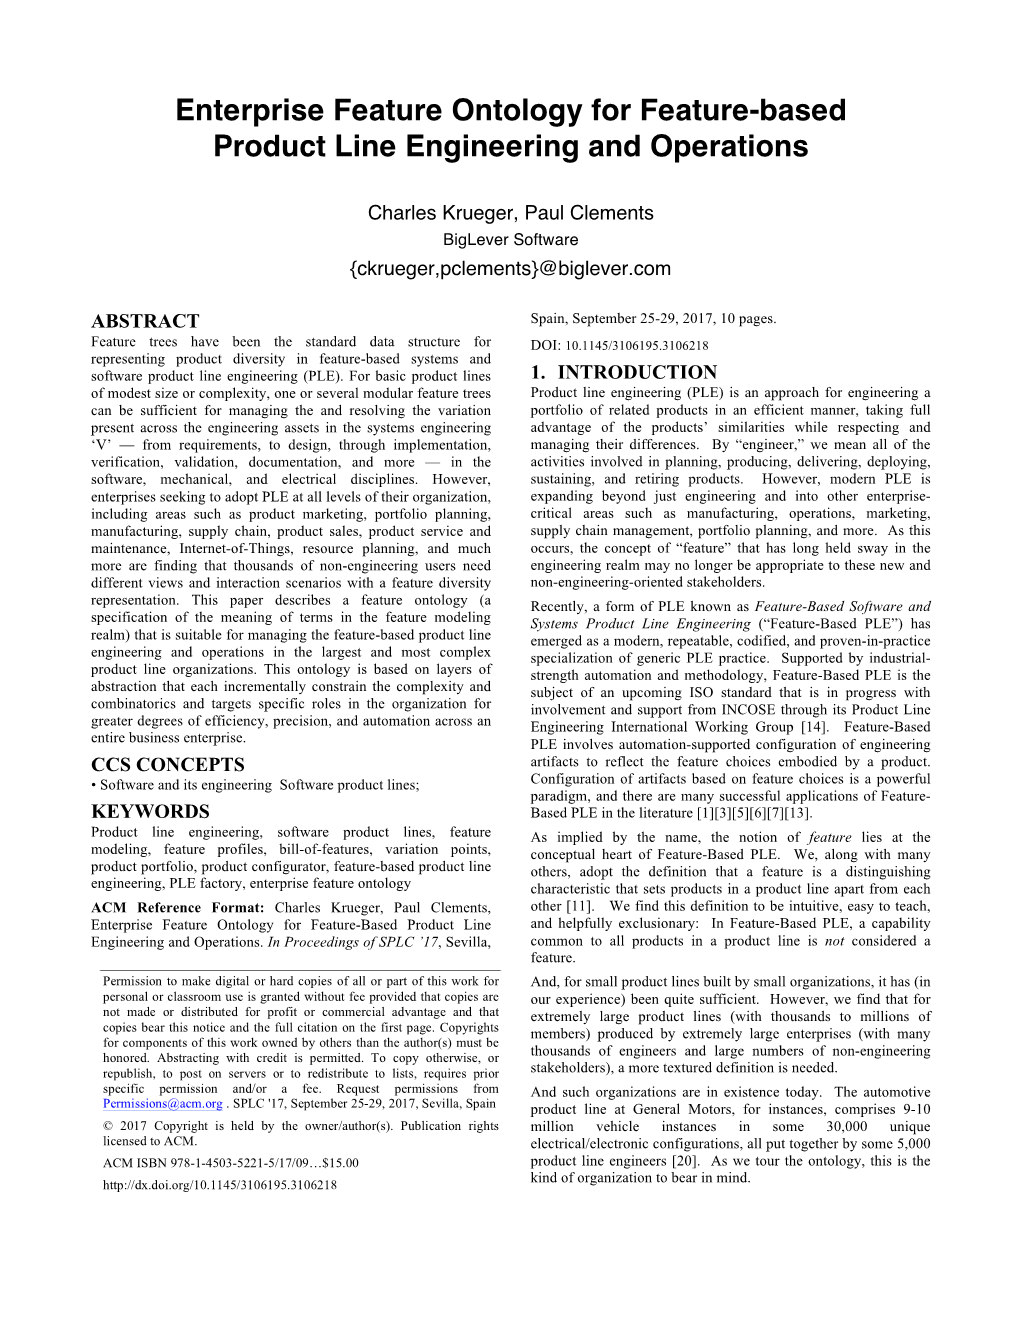 Enterprise Feature Ontology for Feature-Based Product Line Engineering and Operations